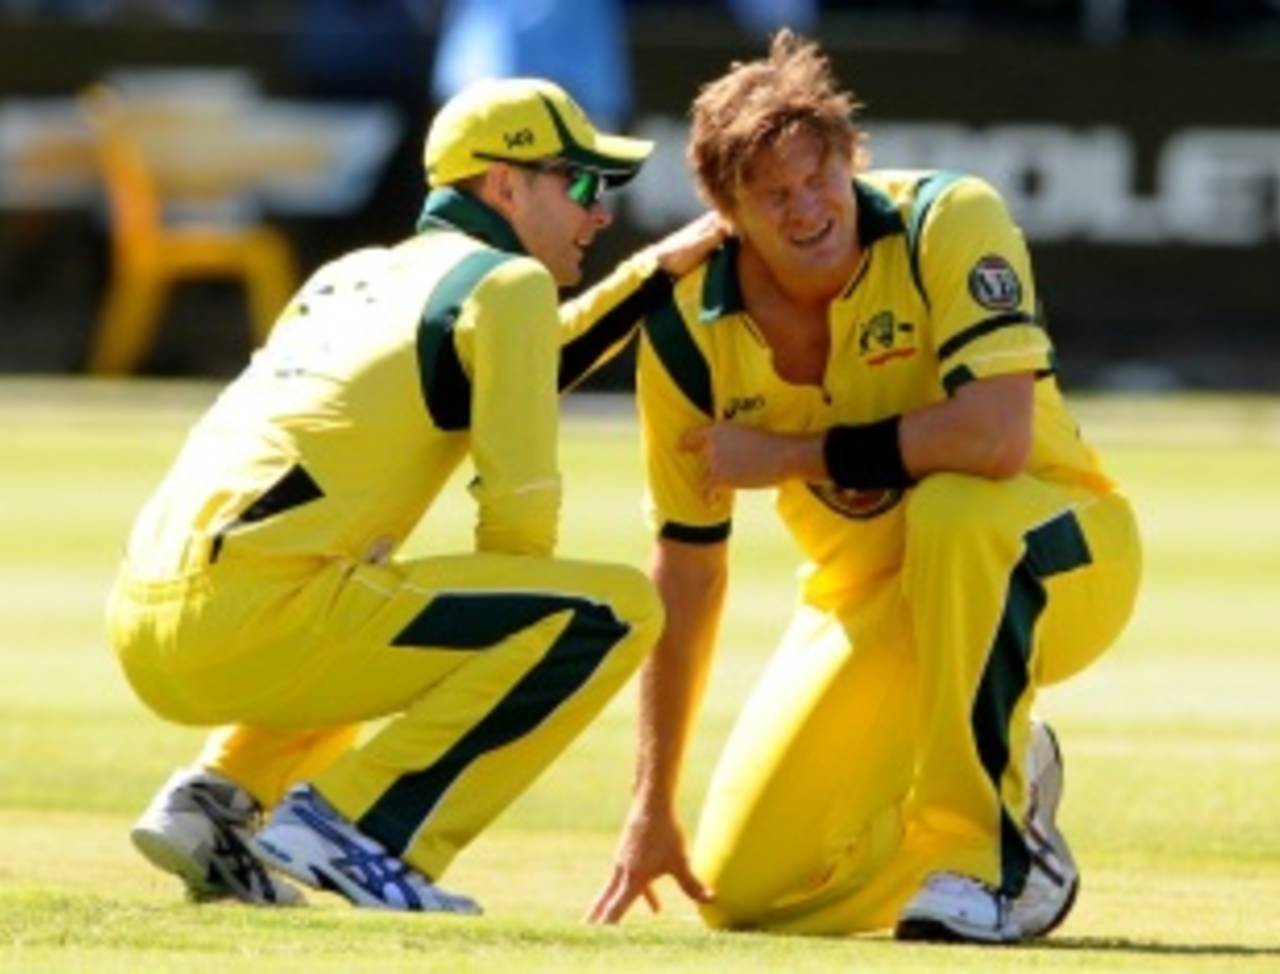 Shane Watson couldn't complete his fourth over but came out to bat&nbsp;&nbsp;&bull;&nbsp;&nbsp;Getty Images